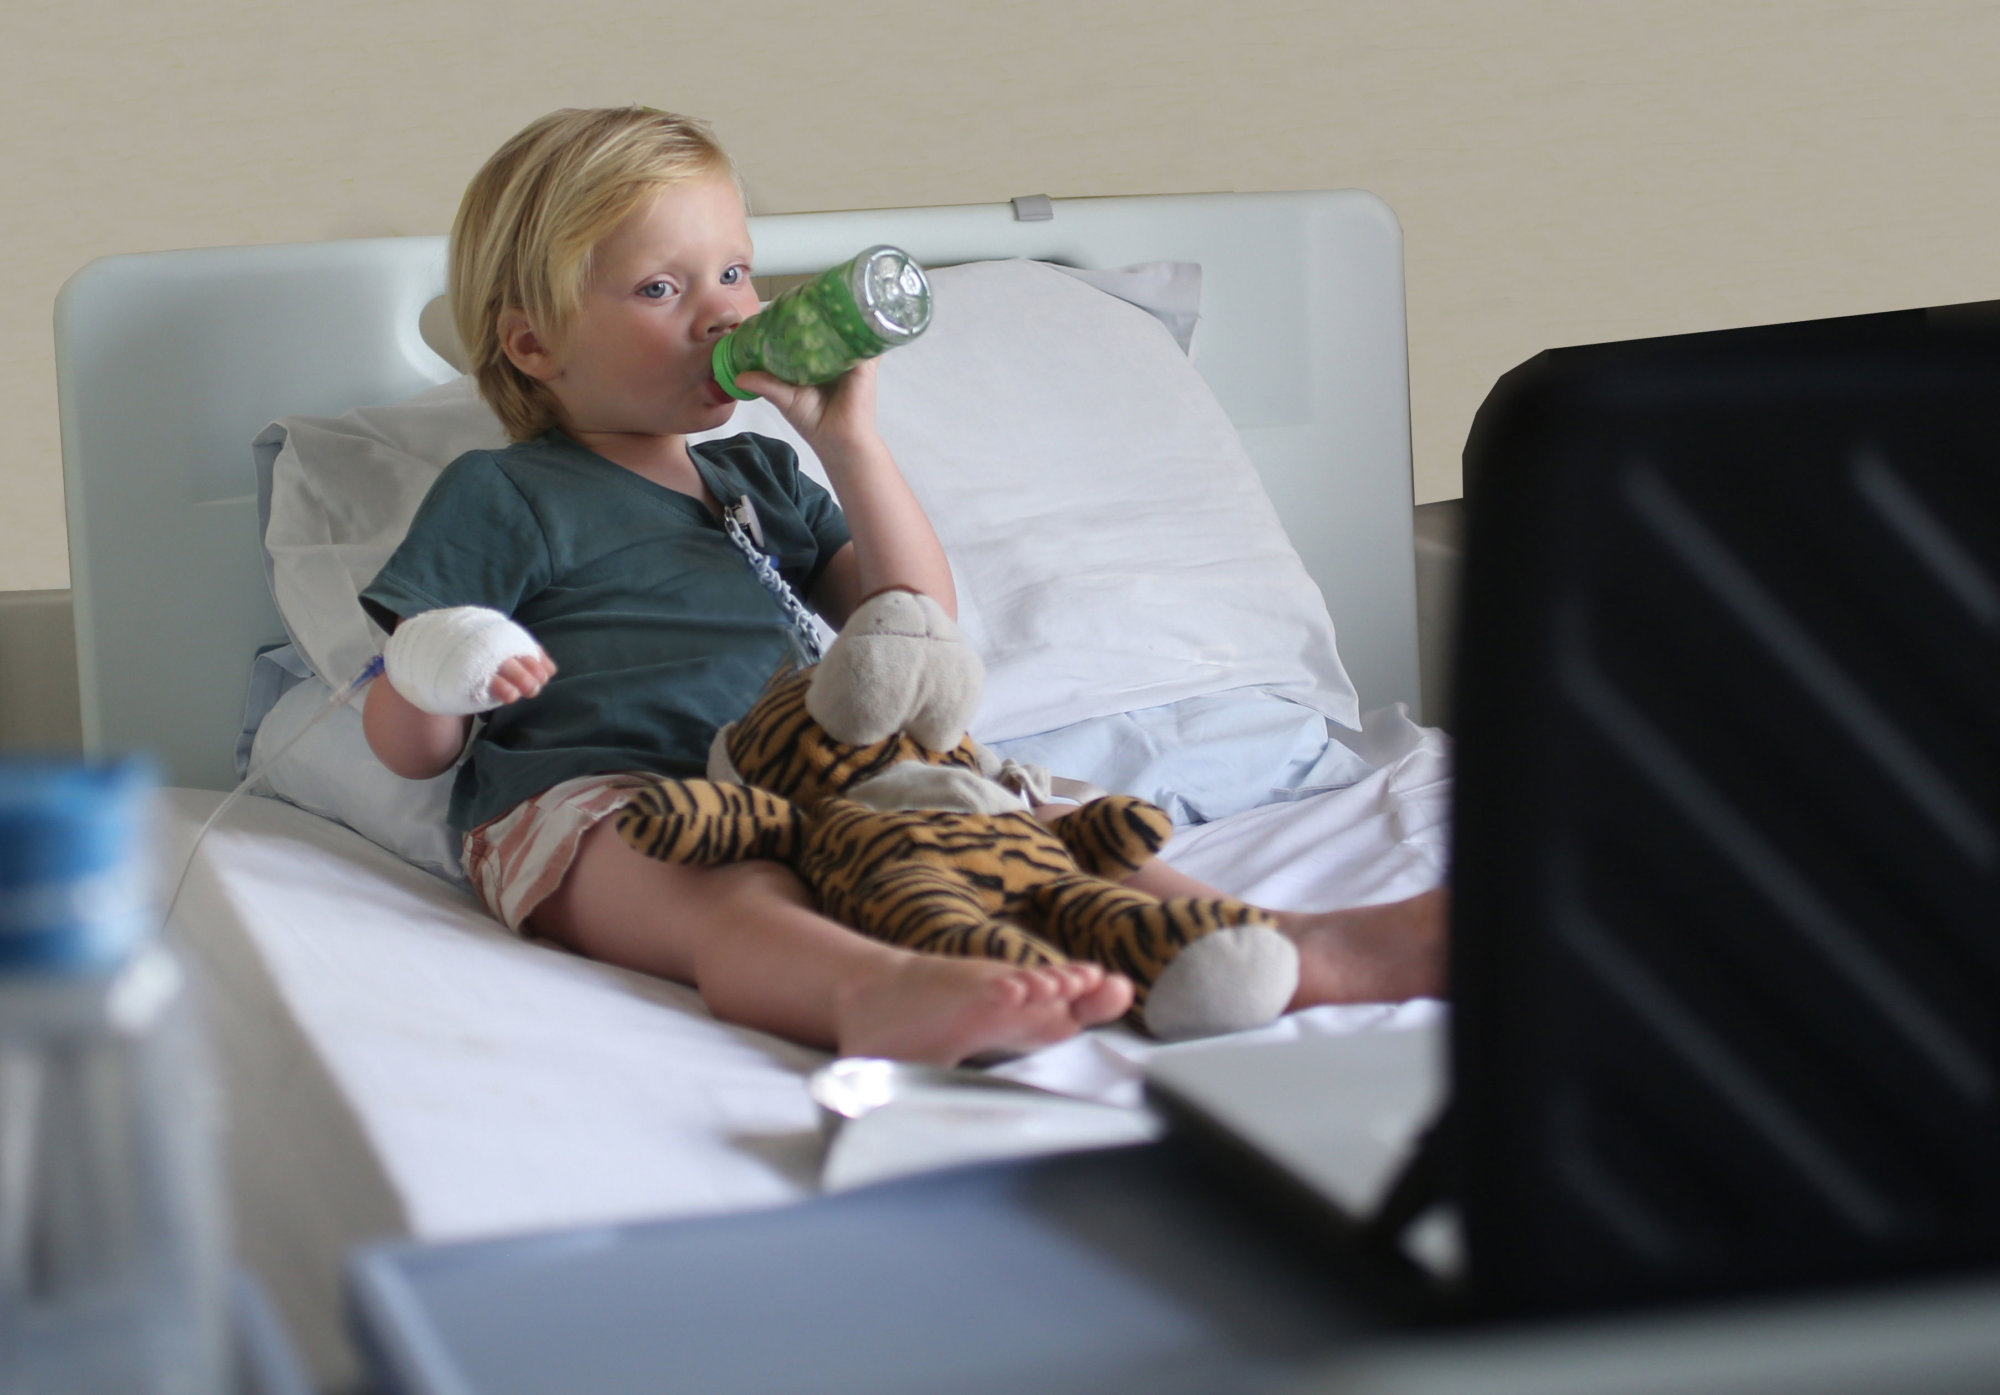 A boy in hospital drinking water while watching tv.